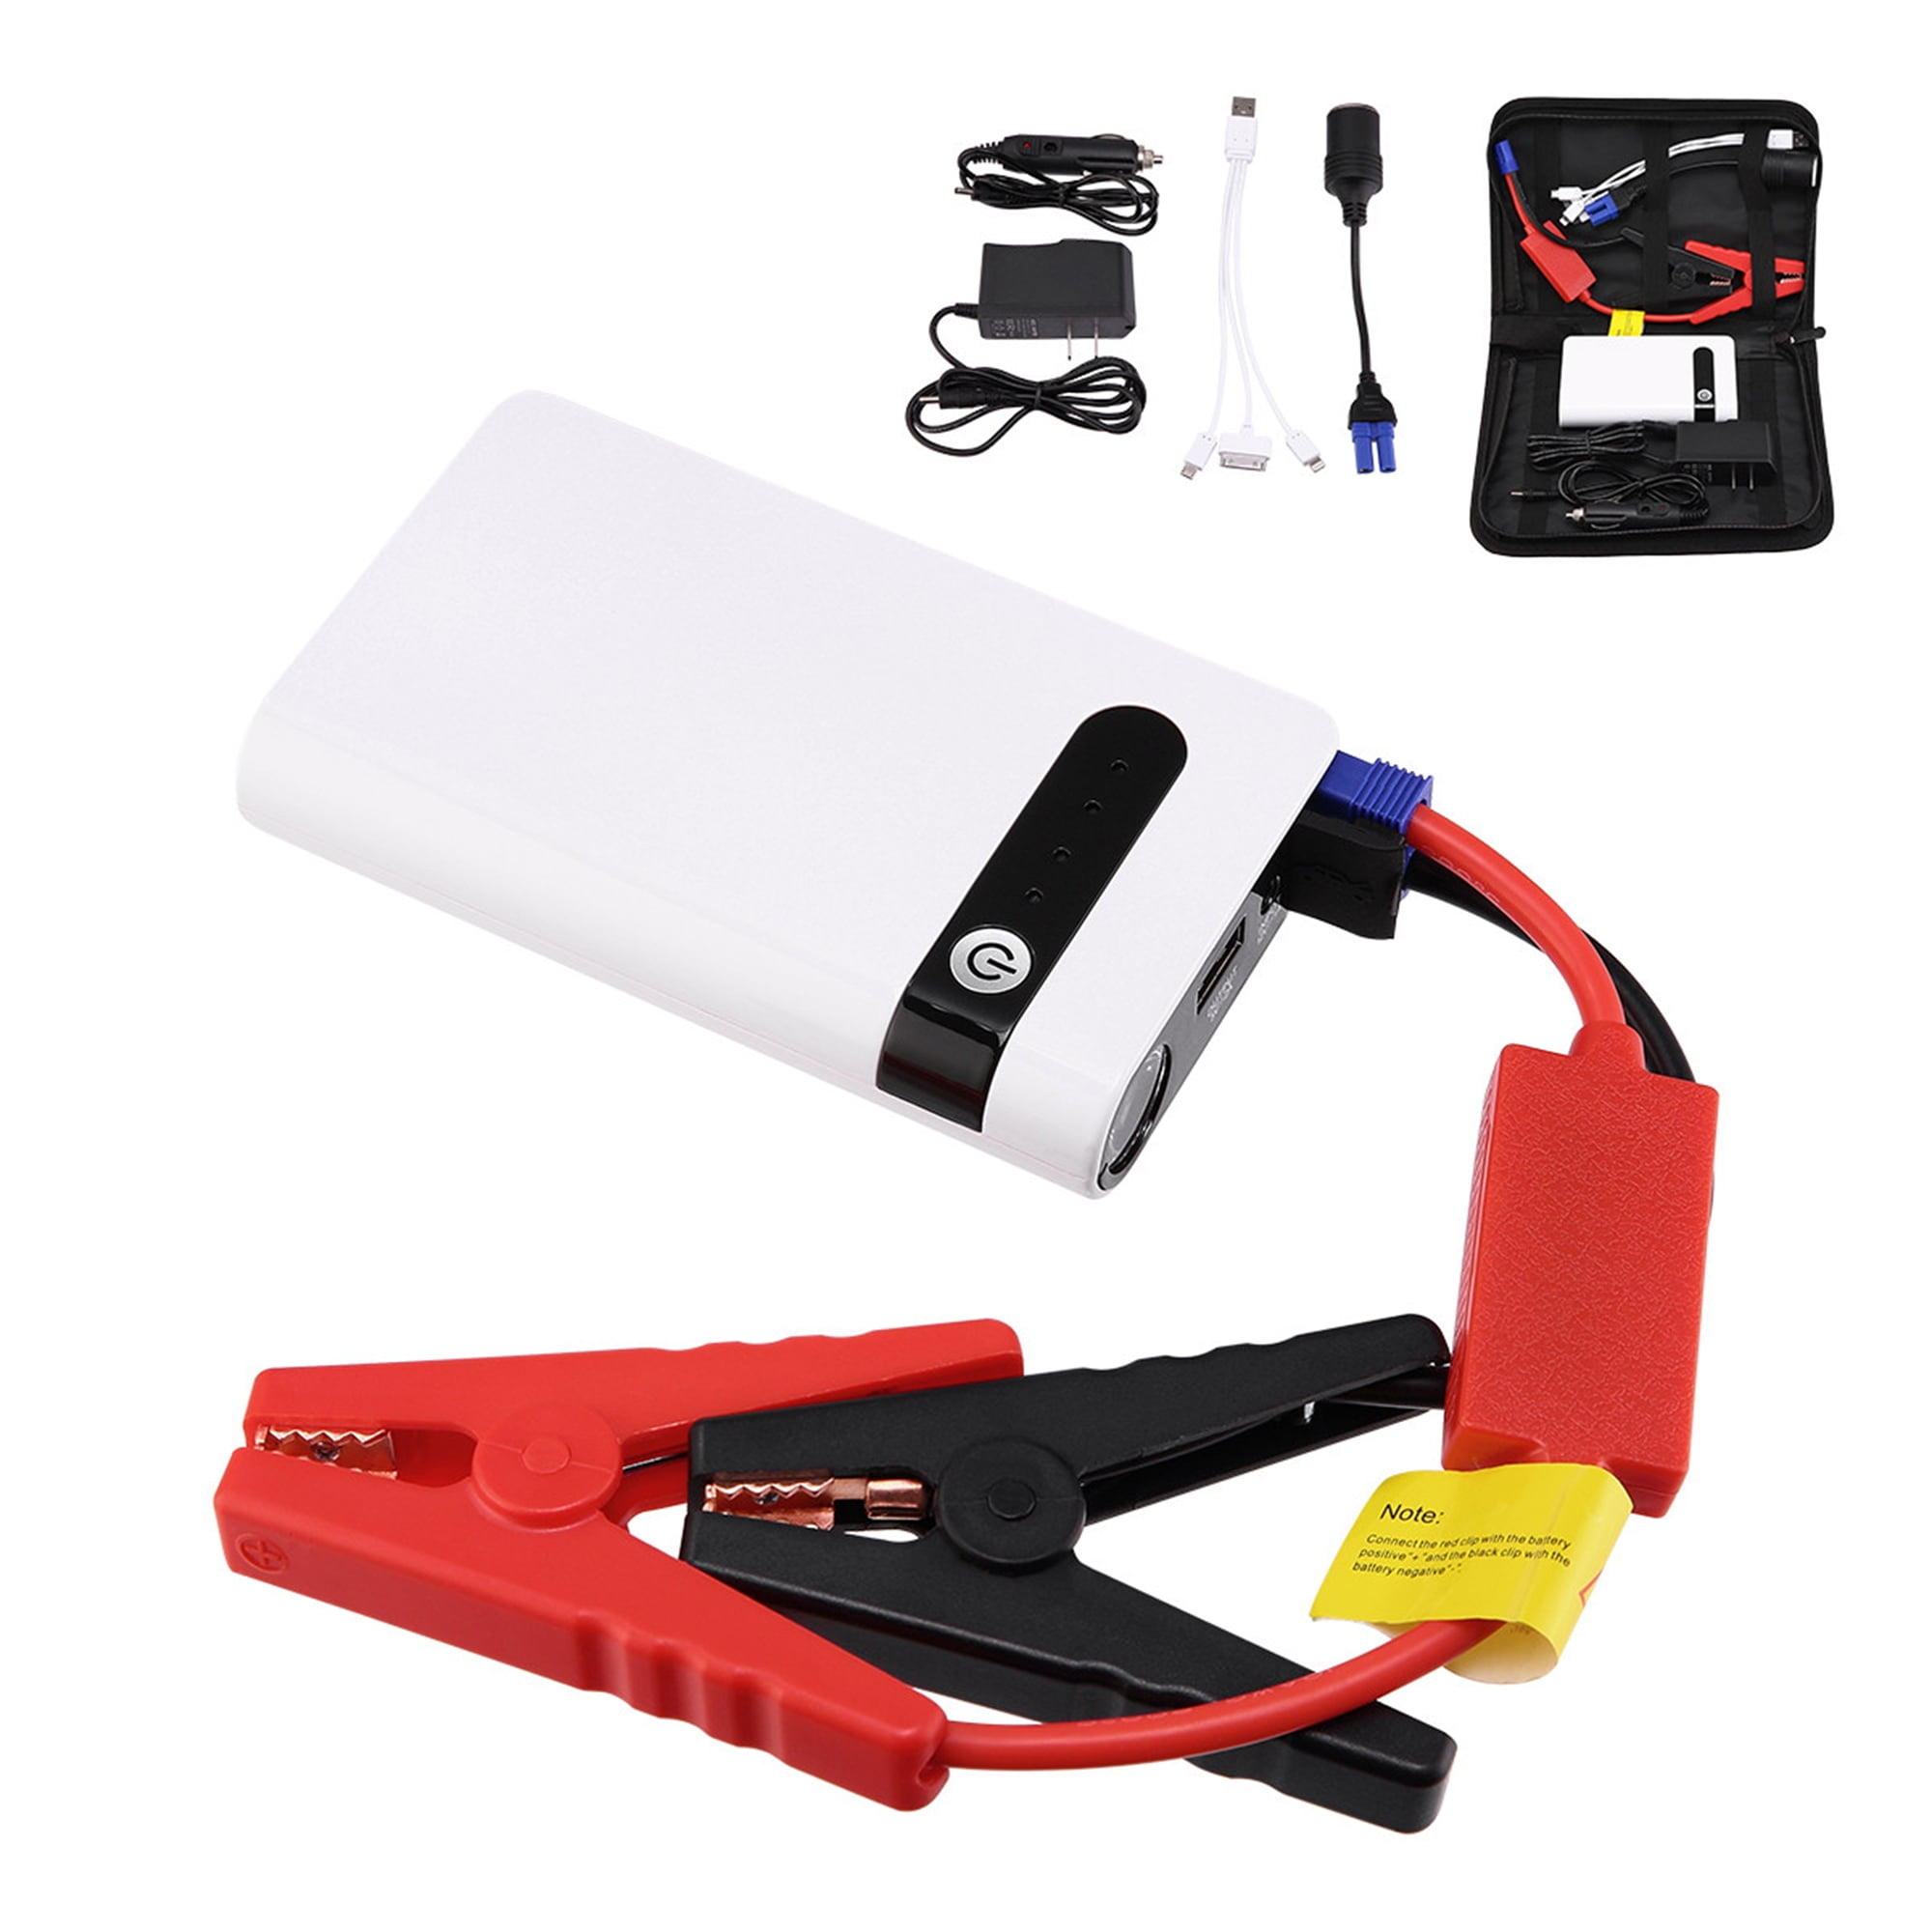 Car Booster Portable Power Bank Vehicle Emergency Jump Starter Battery Charger 